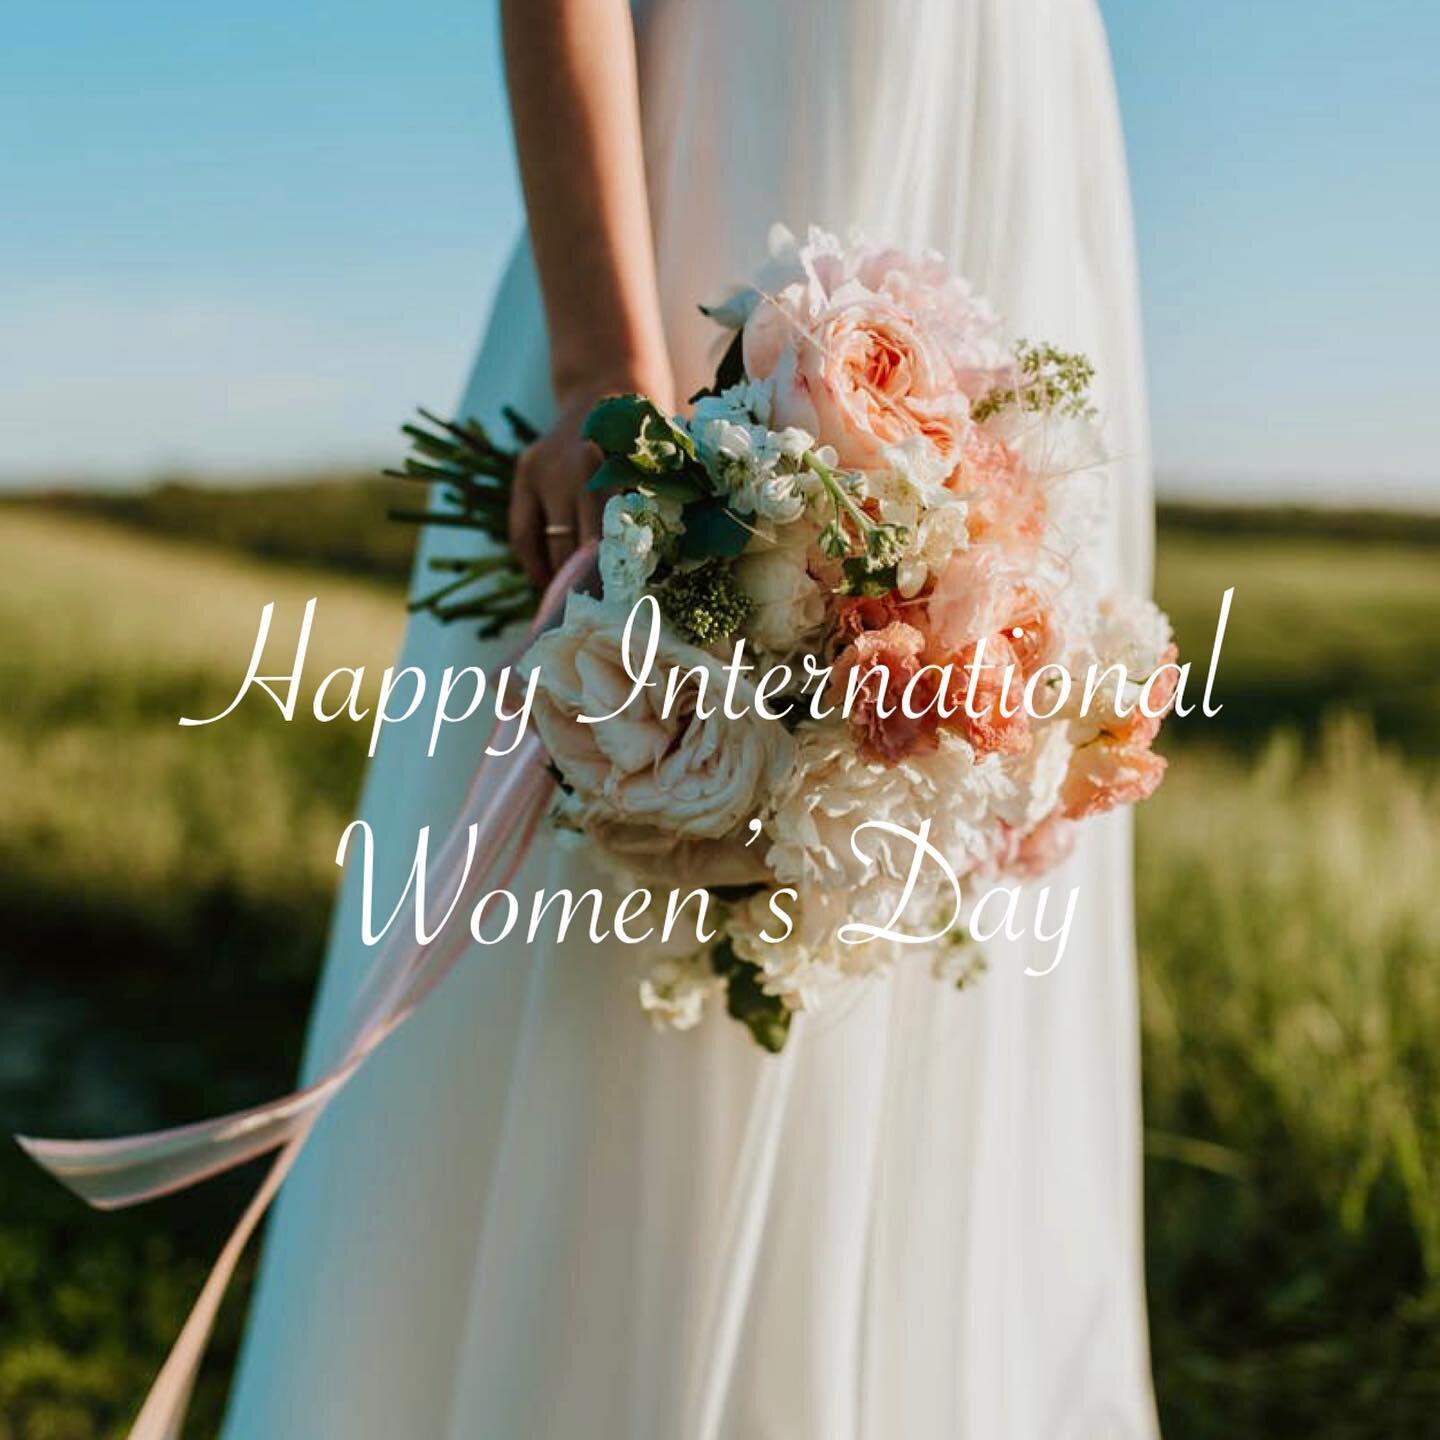 Happy International Women&rsquo;s Day to all of our beautiful brides; past, present, and future. 💐 
.
.
.
.
#internationalwomensday #springhillweddings #springhillestate #countrywedding #weddingphotography #countryside #weddingdestination #weddingve